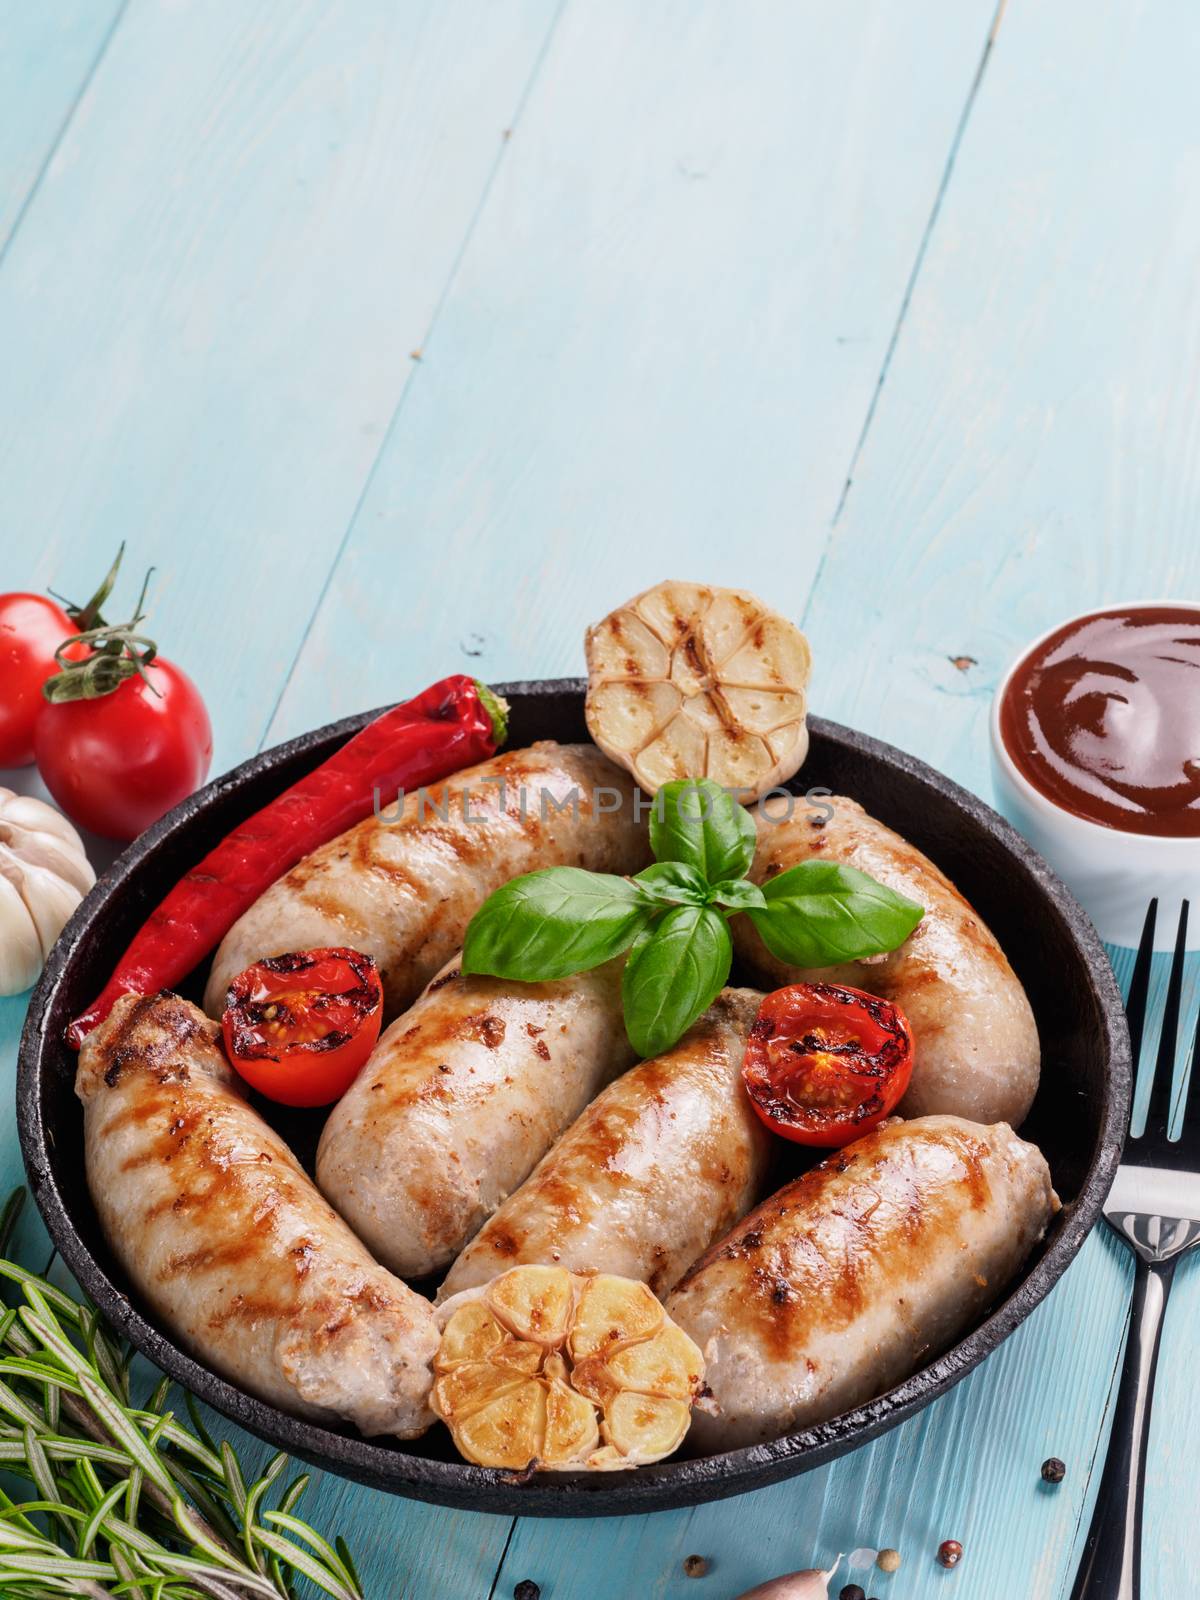 Chicken homemade sausages, sauces ketchup and vegetables and herbs on blue wooden background. Grilled sausages and grilled vegetables in black iron pan. Top view or flat lay. Copy space. Vertical.